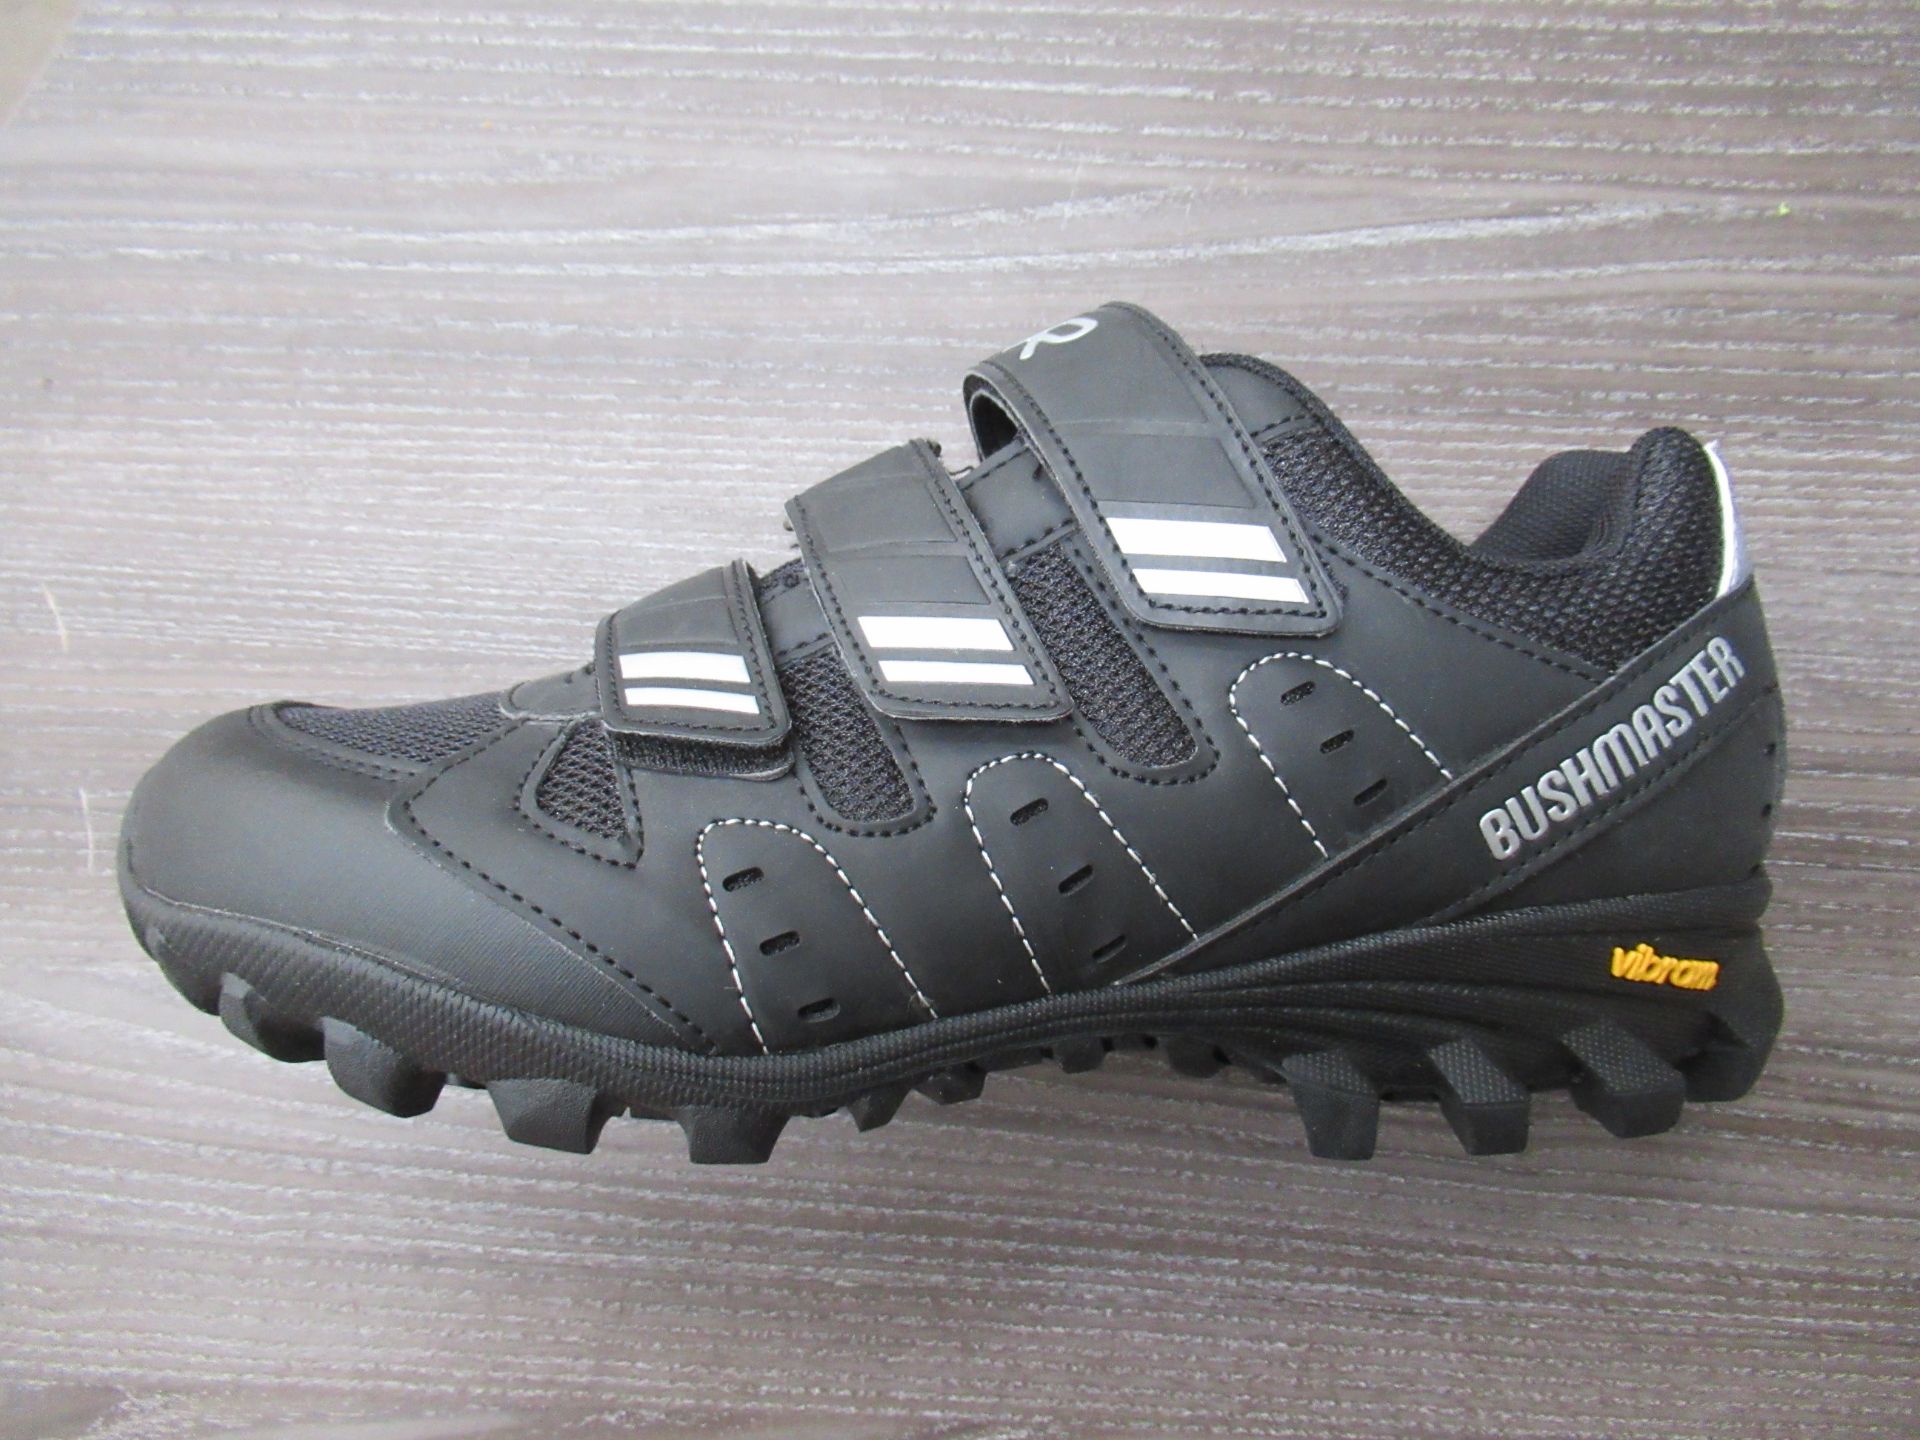 3 x Pairs of FLR cycling shoes - 1 x Bushmaster boxed EU size 41 (RRP£79.99); 1 x F-11 boxed EU size - Image 4 of 10